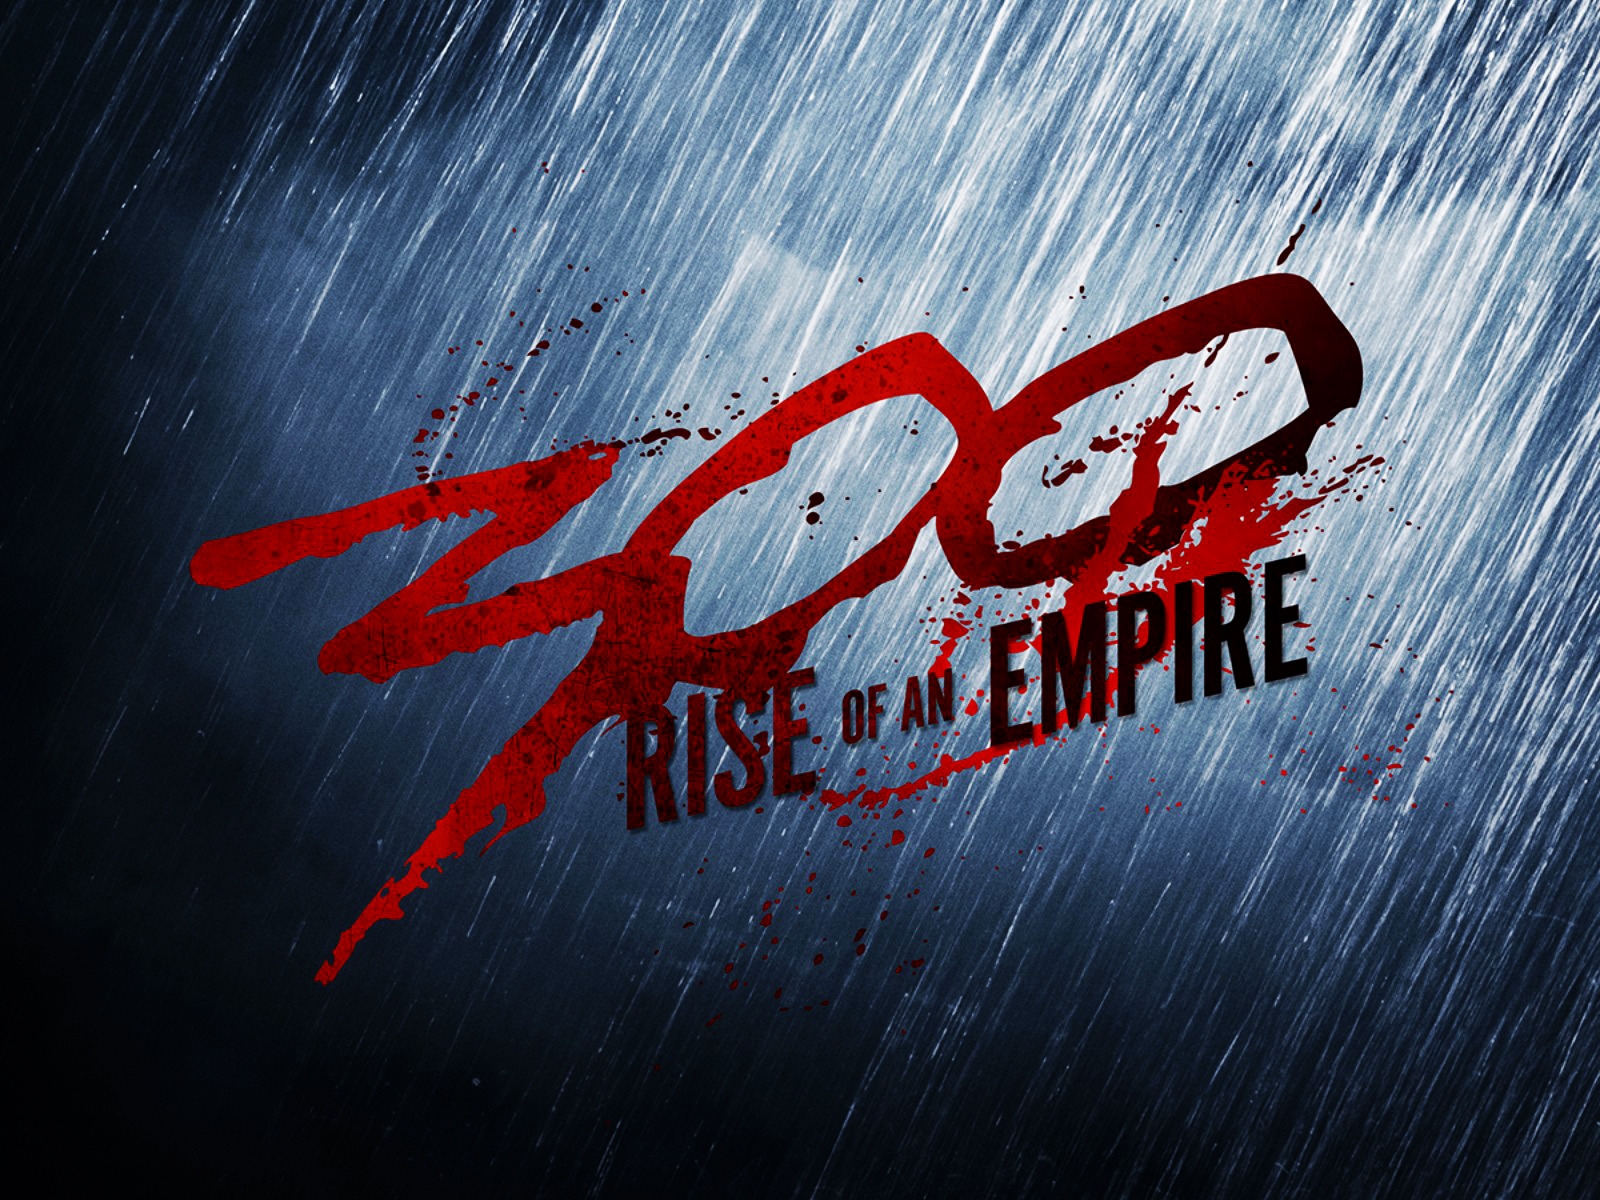 300 rise of the empire wallpaper hd